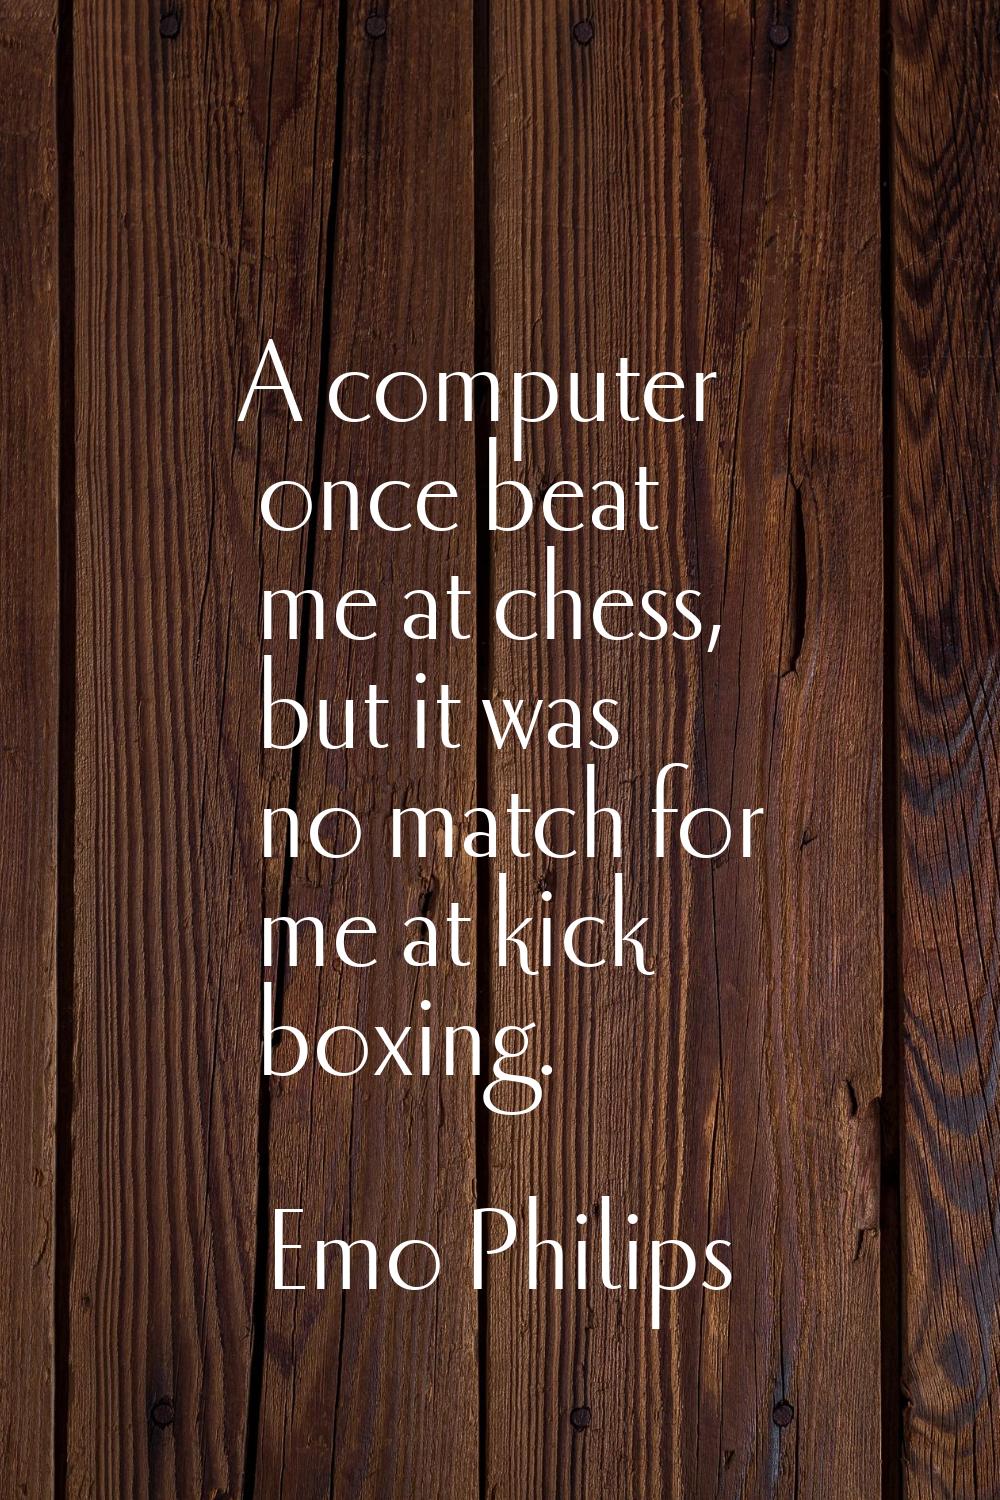 A computer once beat me at chess, but it was no match for me at kick boxing.